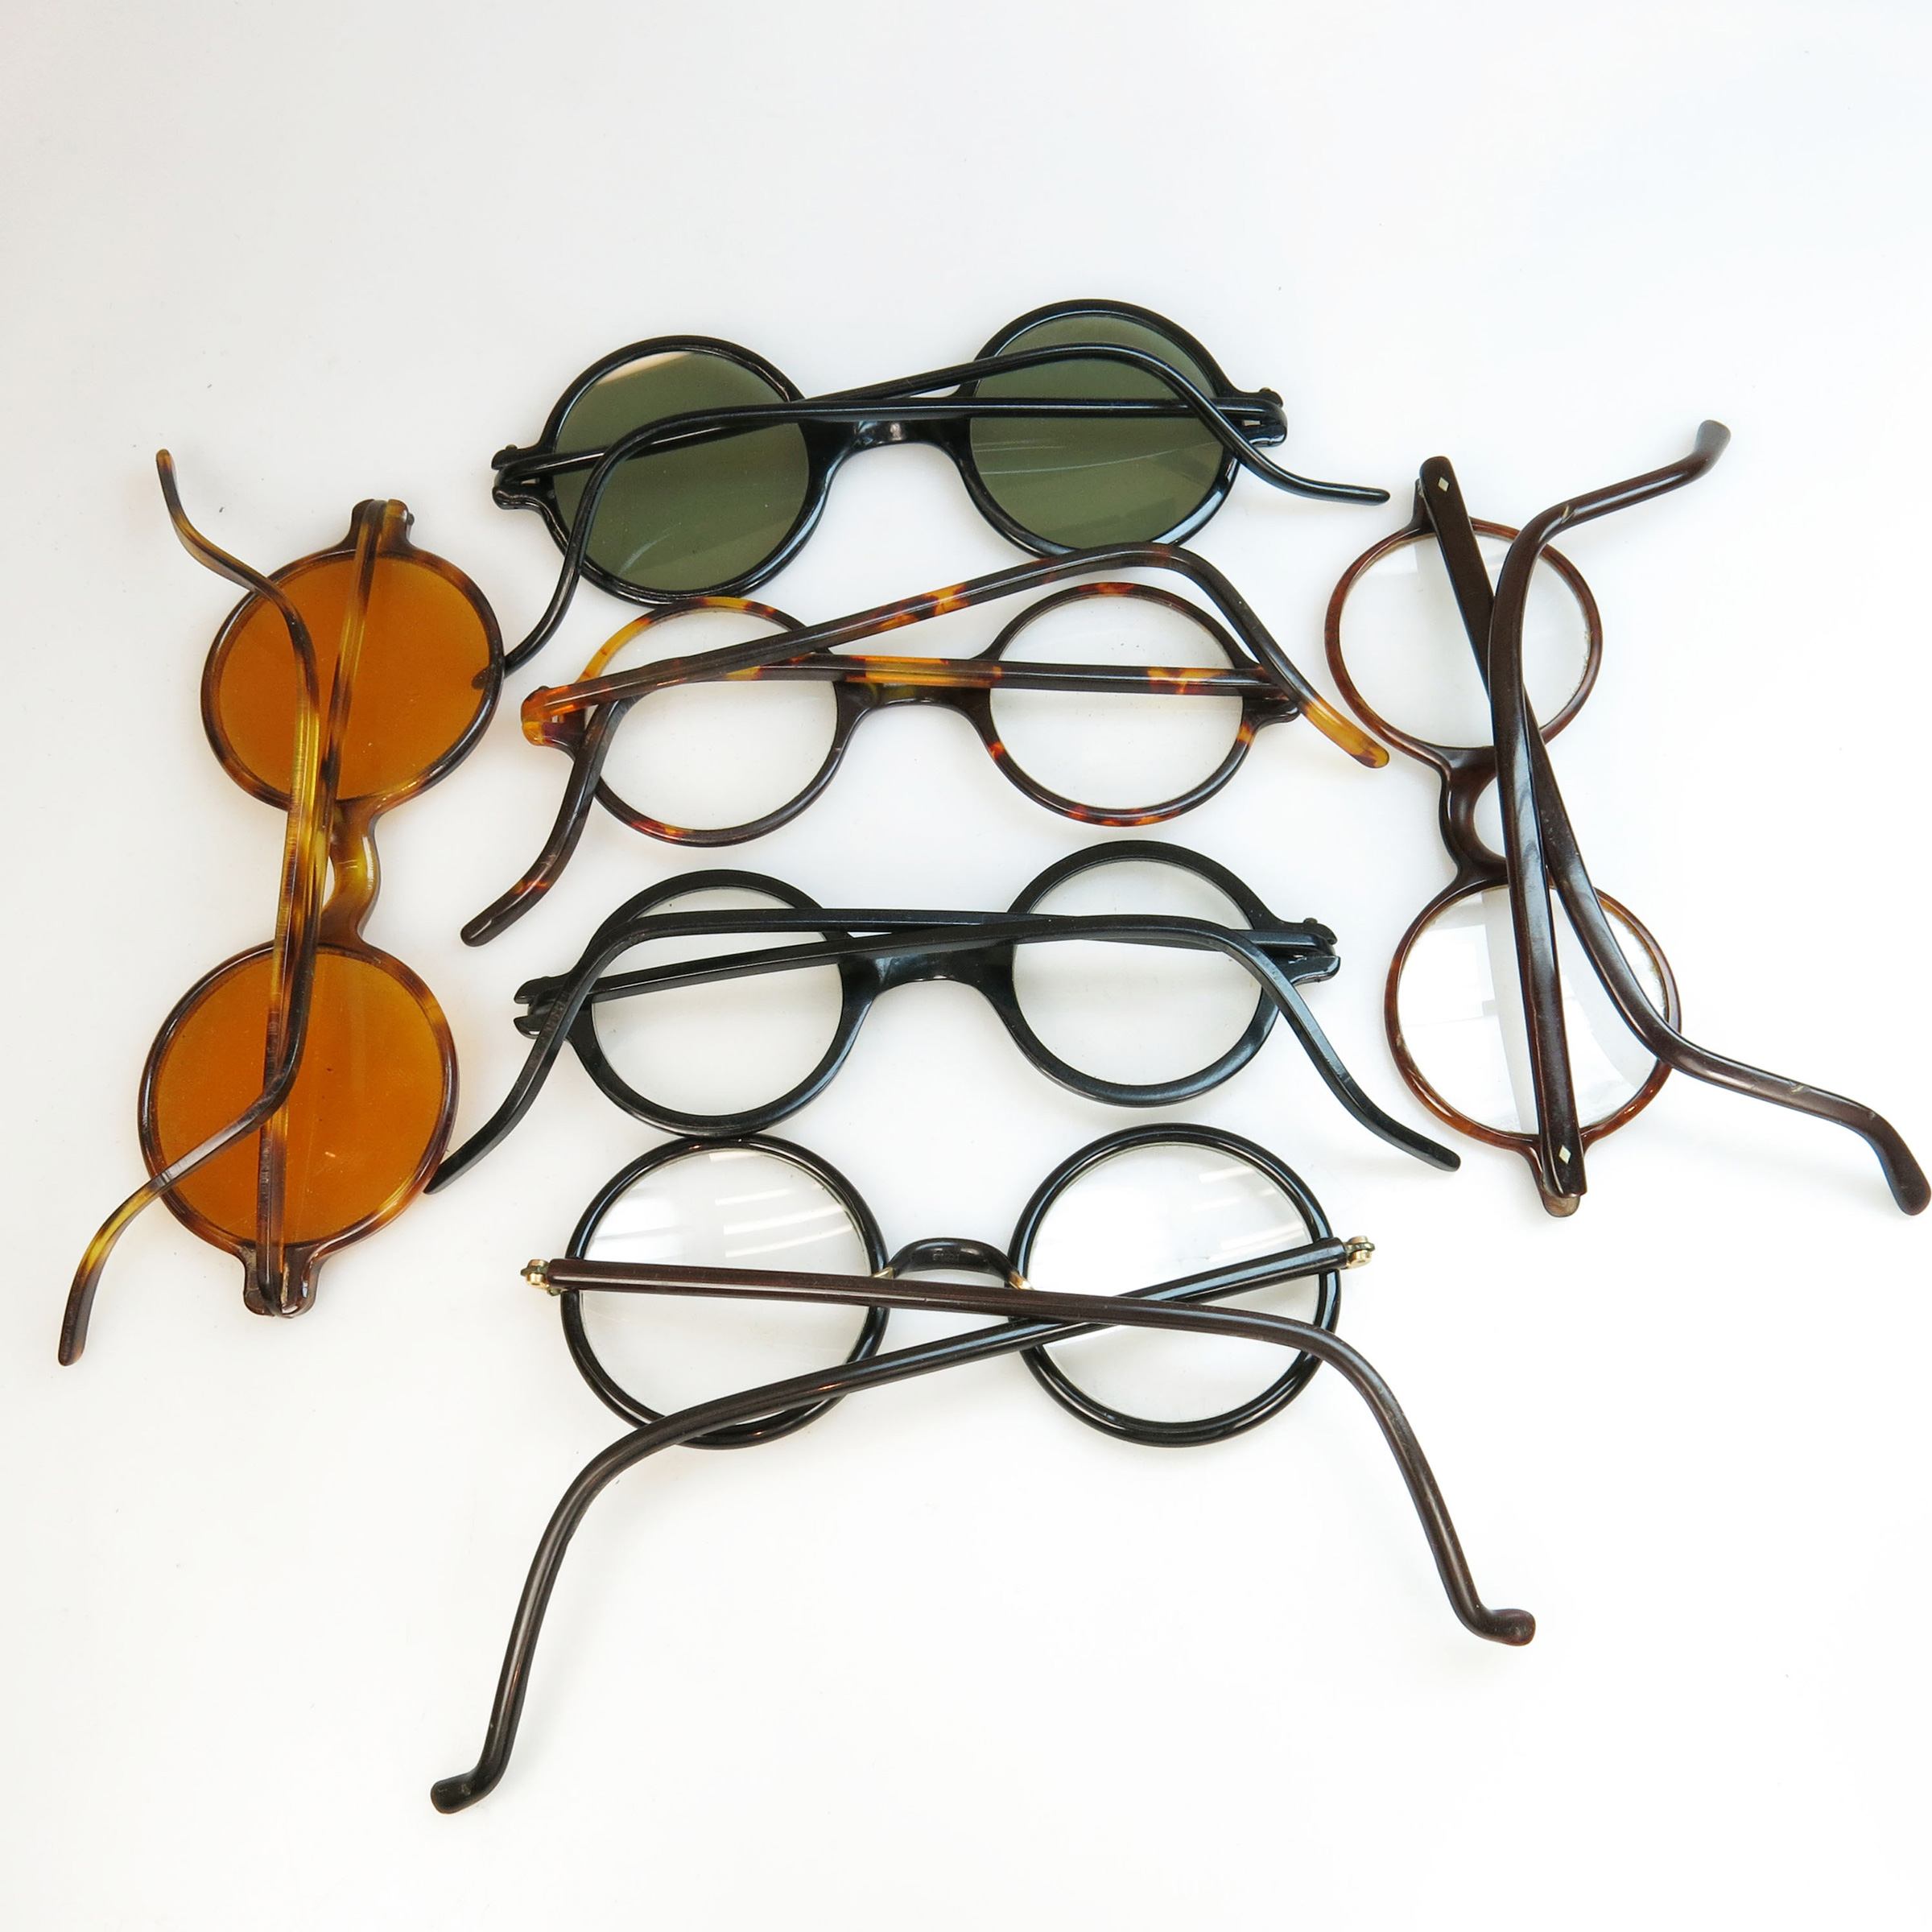 6 Pairs Of Early 20th Century Temple Spectacles